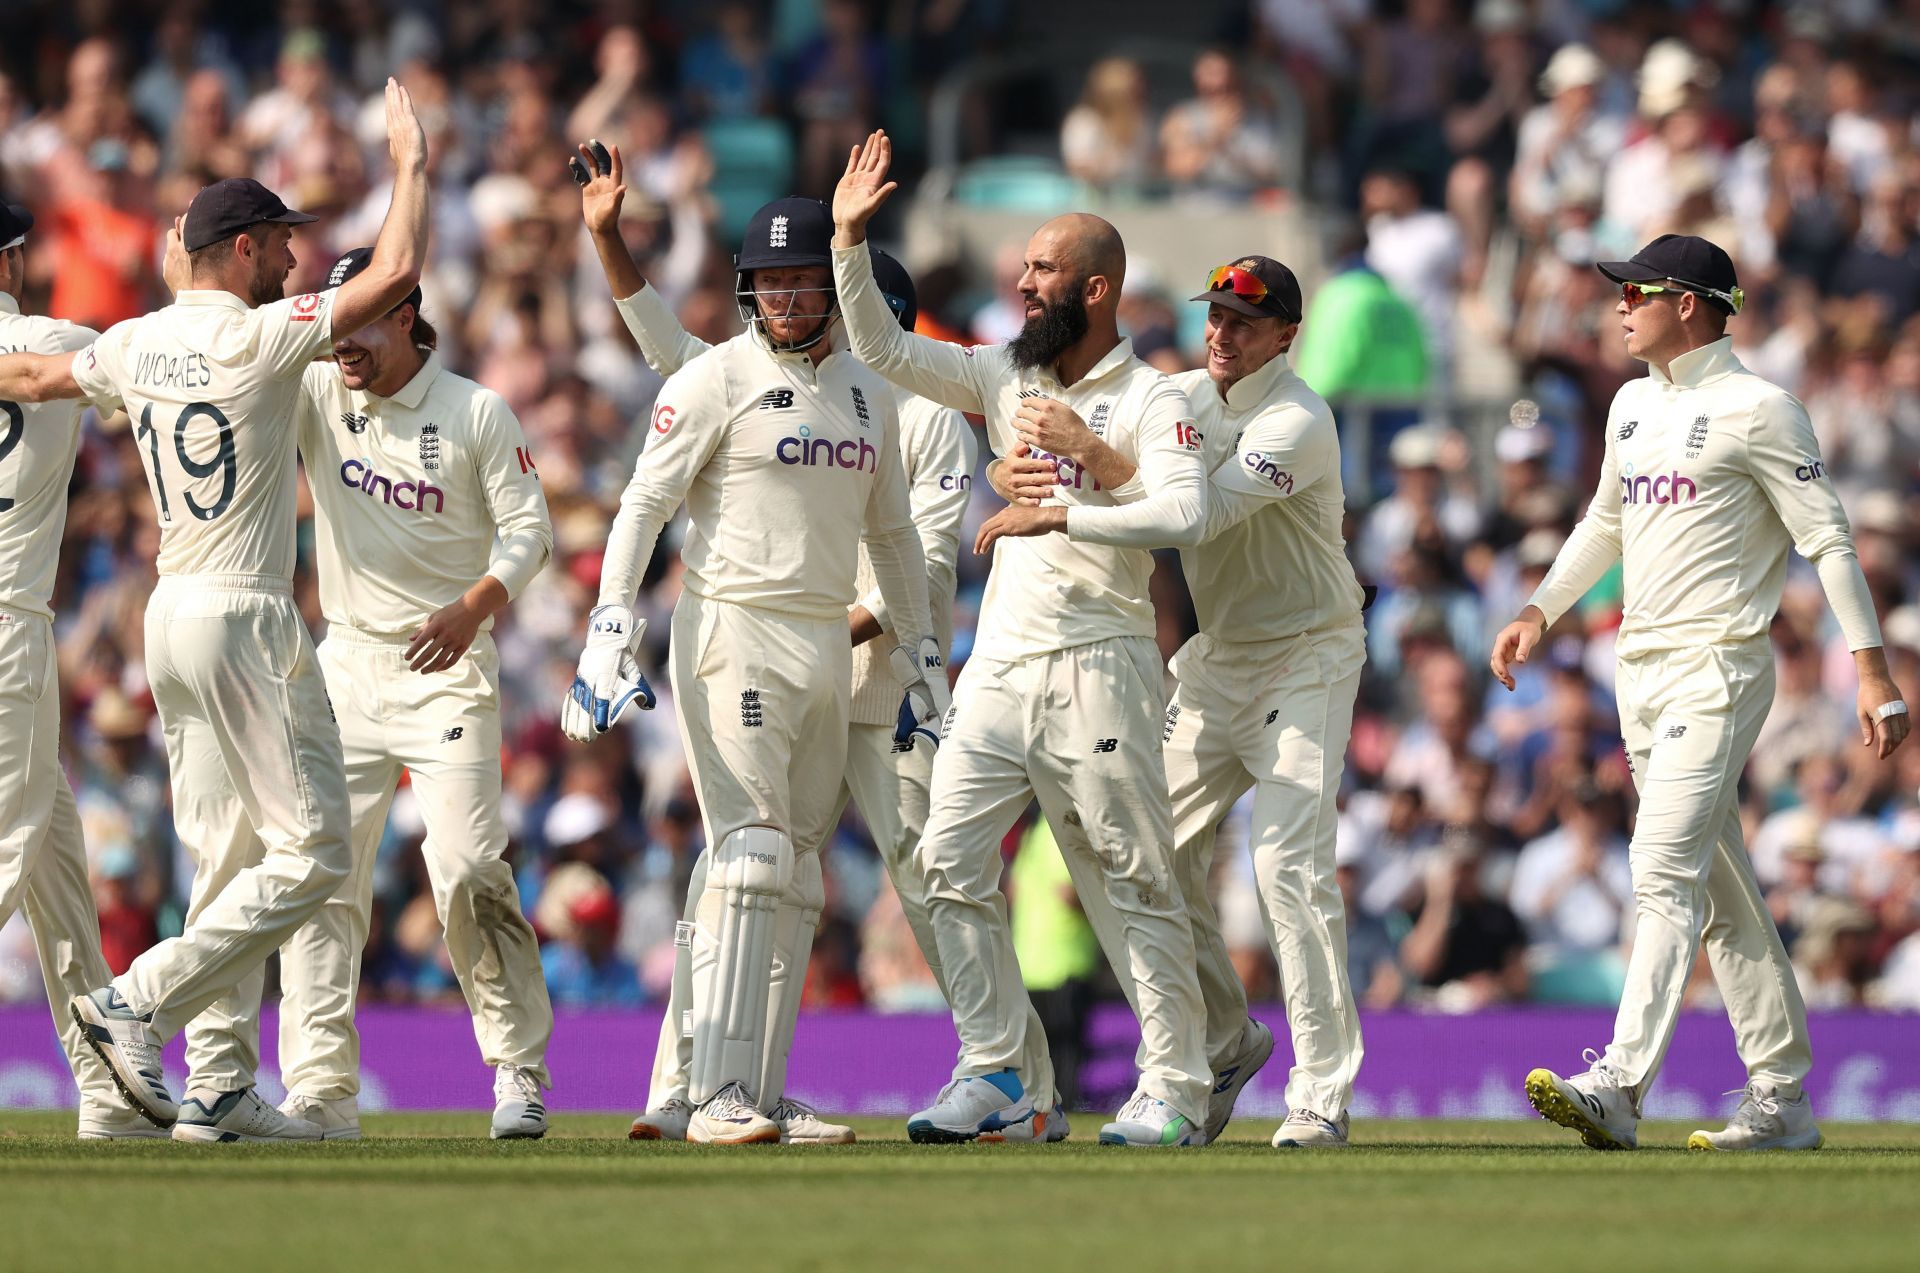 The 36-year-old is third on the list of England spinners with the most Test wickets. (Pic: Getty Images)